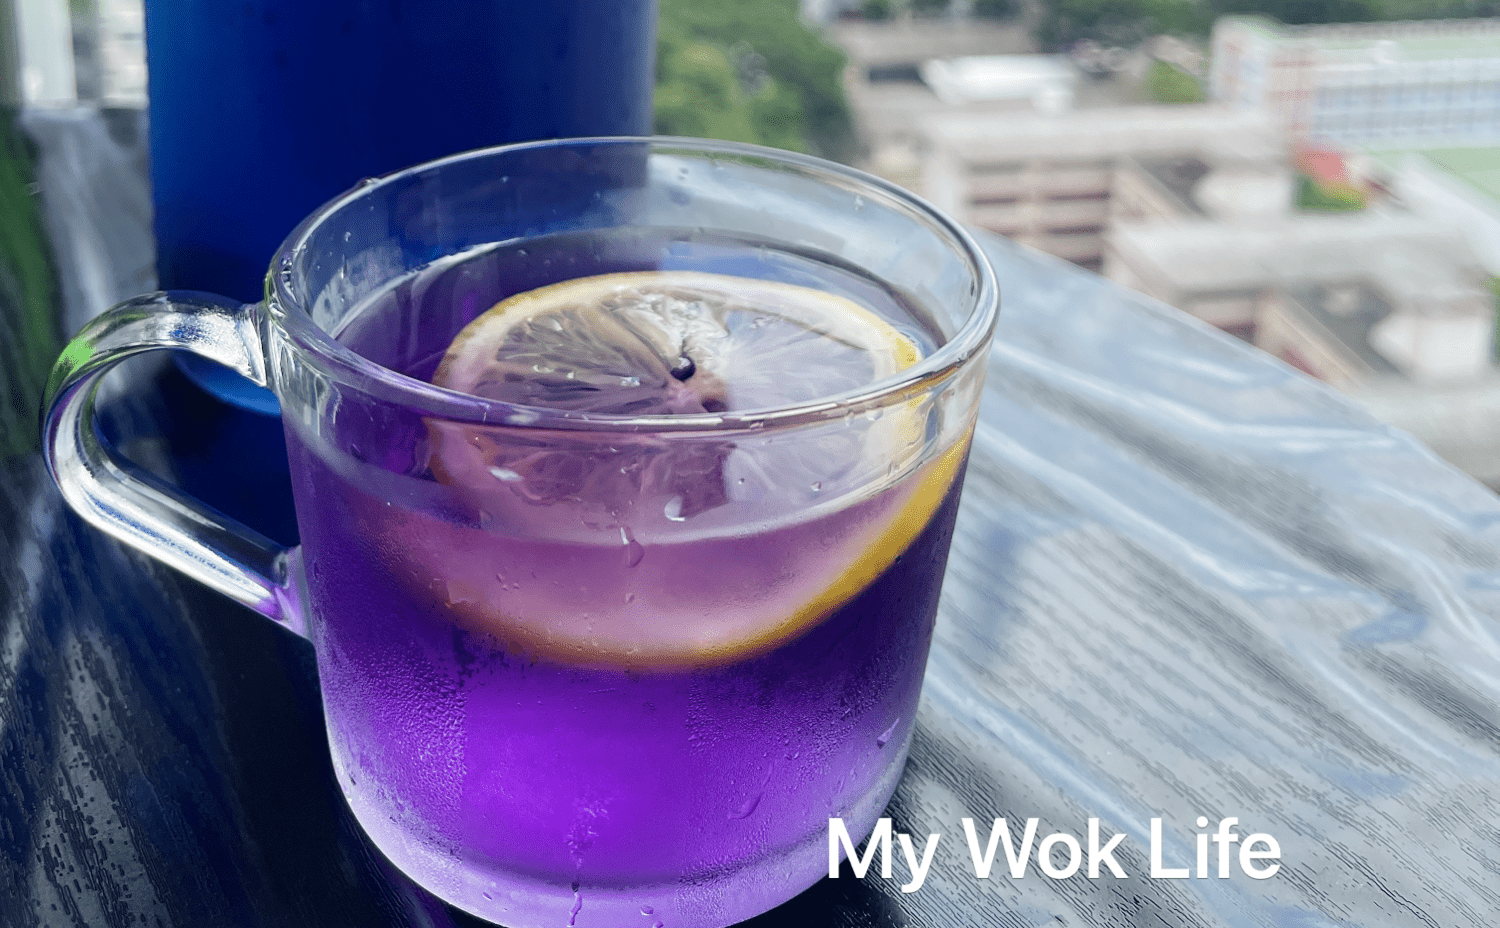 My Wok Life Cooking Blog - Cold Brew Butterfly Pea Tea (Great Blue Pea Water) 冷泡蝶豆花茶  - Singapore Chilli Crab